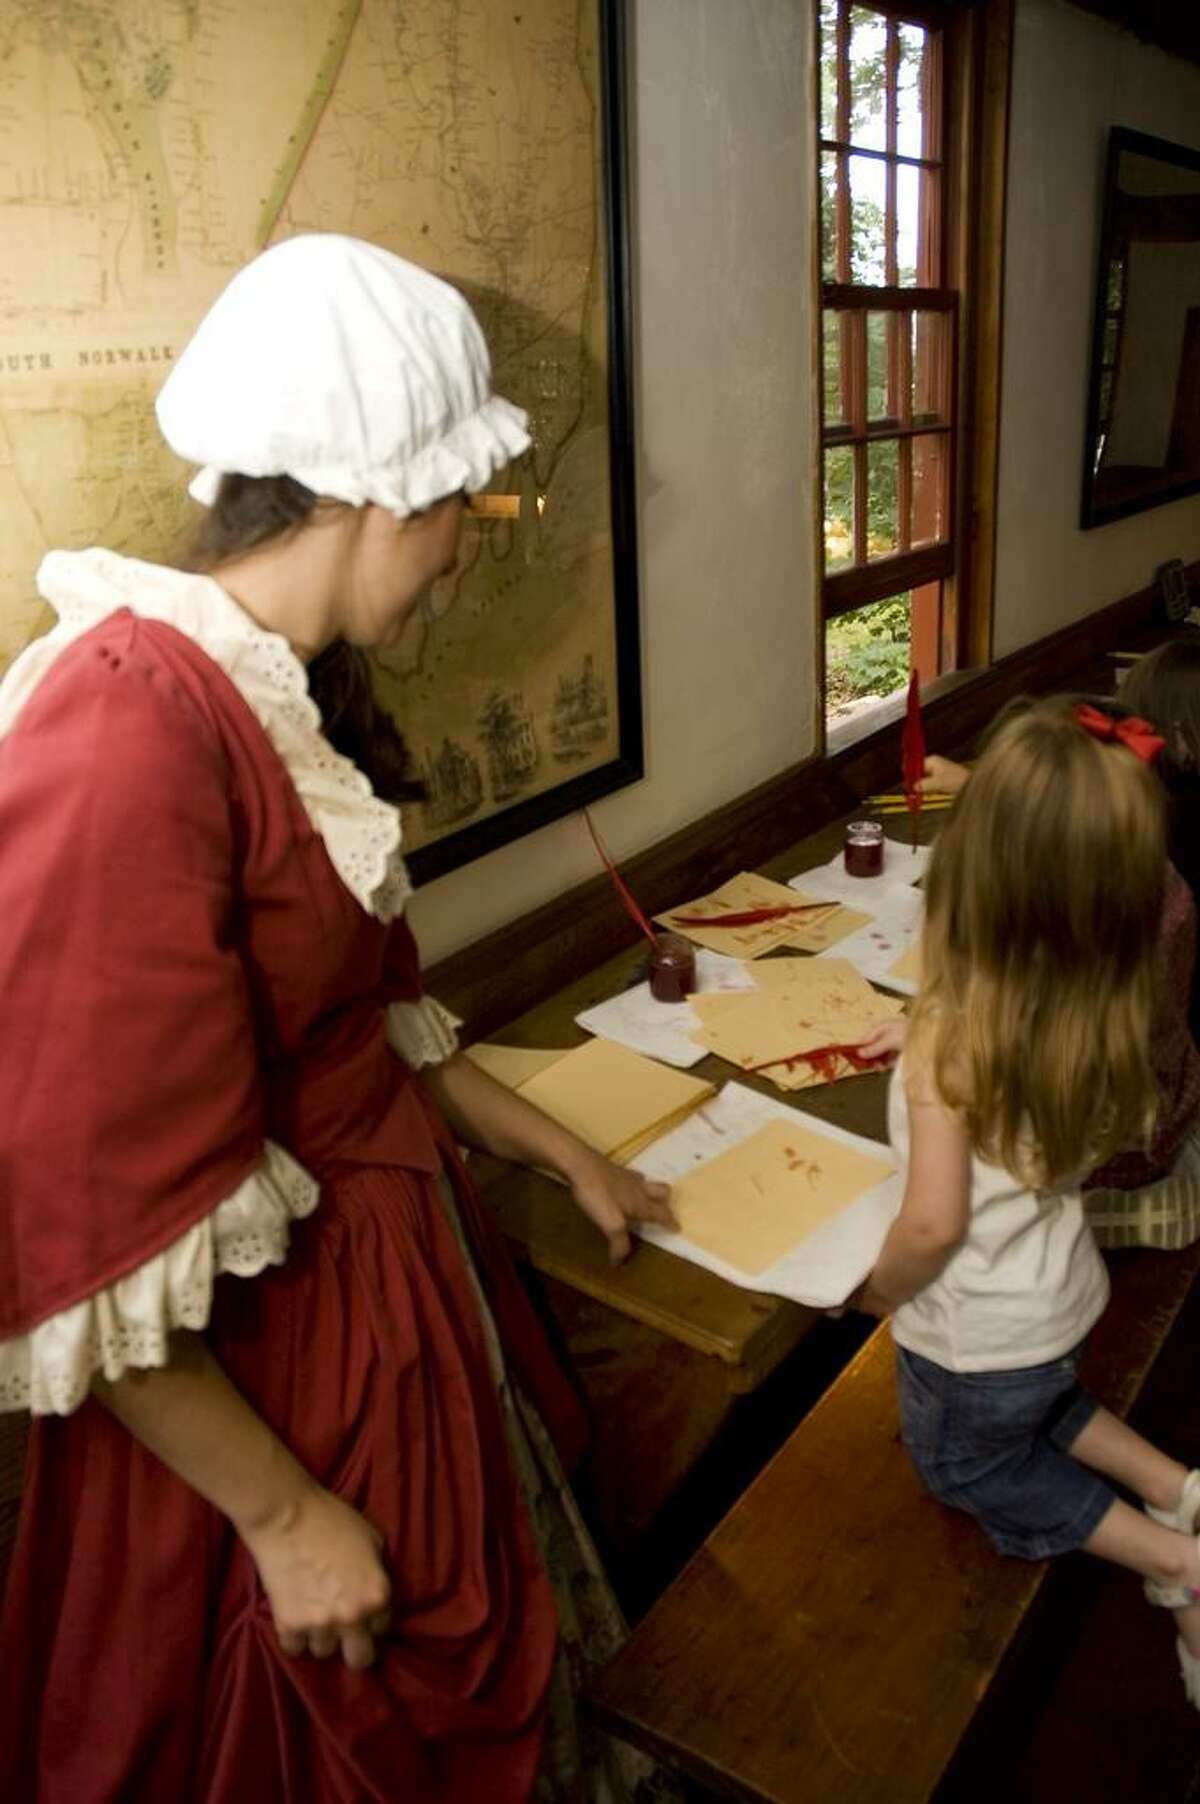 Docent info sessions will take place from 10 a.m. to 1 p.m. Wednesday, Jan. 24, and from 10 a.m. to 1 p.m. Thursday, Jan. 25, at the Norwalk Historical Society Museum, 141 East Ave.